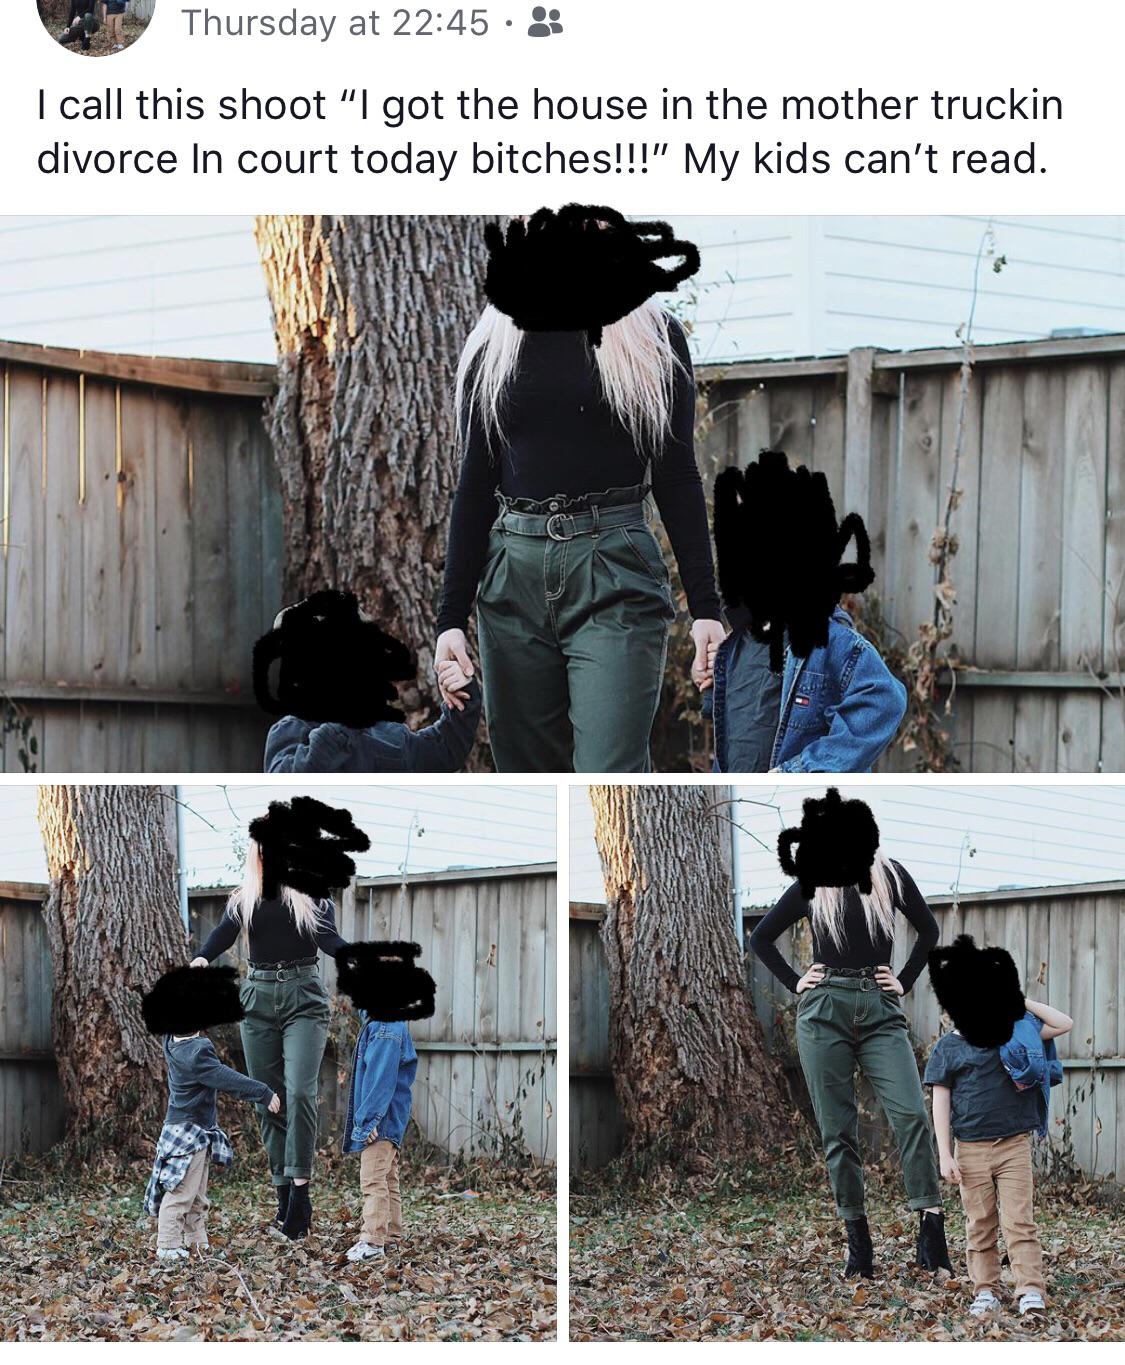 human behavior - Thursday at I call this shoot "I got the house in the mother truckin divorce In court today bitches!!!" My kids can't read.